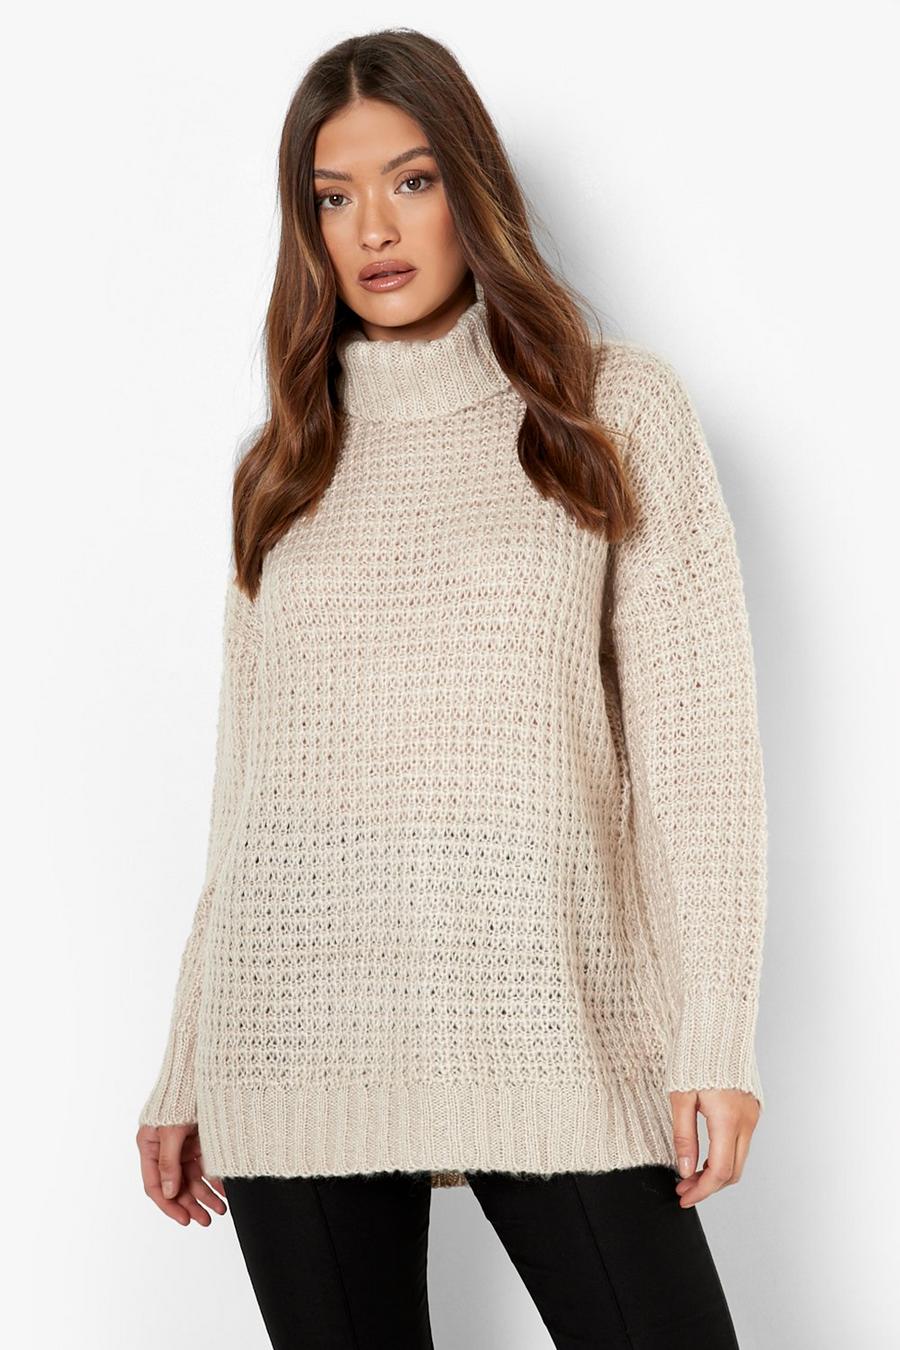 Natural Boohoo Synthetic Soft Knit Roll Neck Slouchy Jumper in Mushroom Womens Clothing Jumpers and knitwear Turtlenecks 